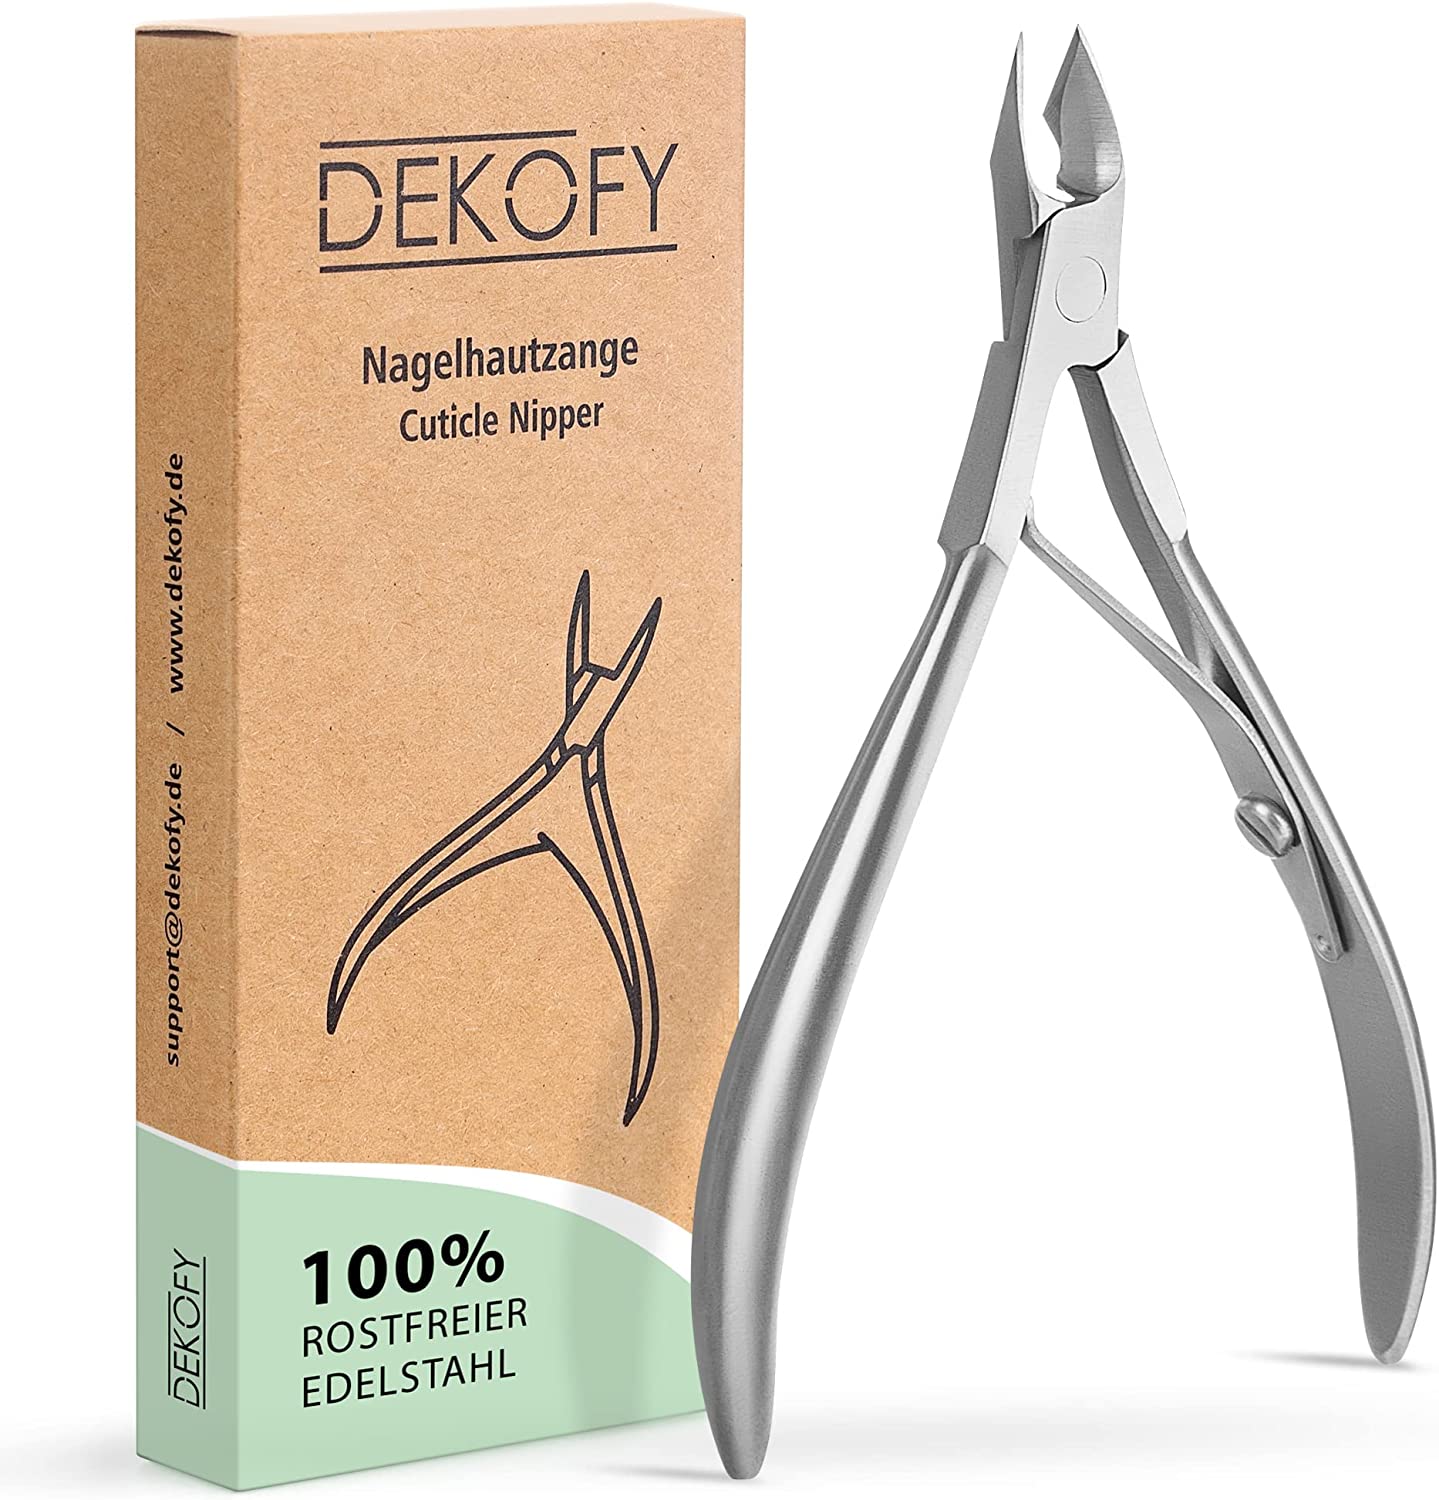 DEKOFY Stainless Steel Cuticle Nippers - Extra Sharp Cuticle Cutter with Precise Cut - for Painless Cuticle Removal on Fingers and Toes - Cuticle Scissors, Cuticle Remover, ‎silver